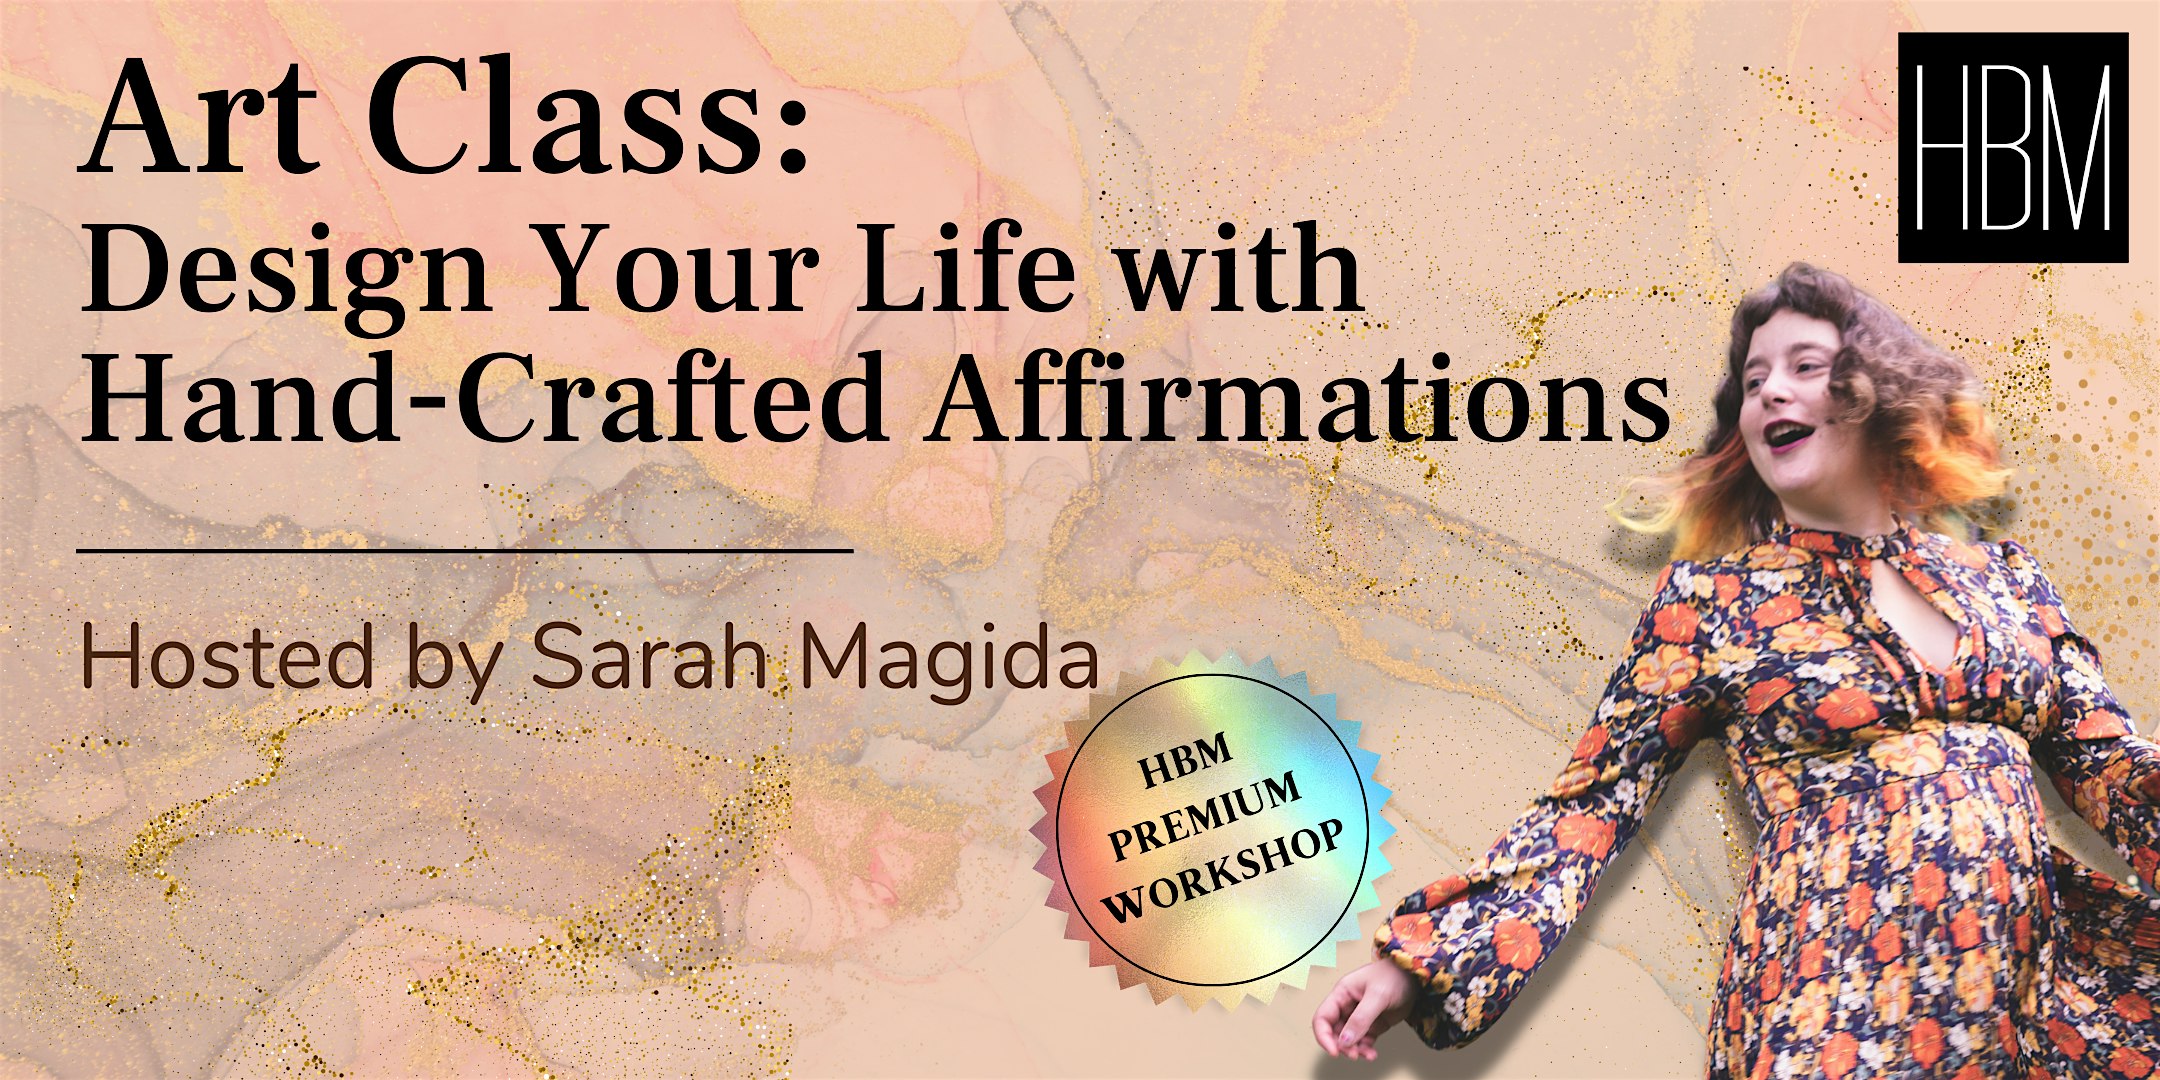 Art Class: Design Your Life with Hand-Crafted Affirmations